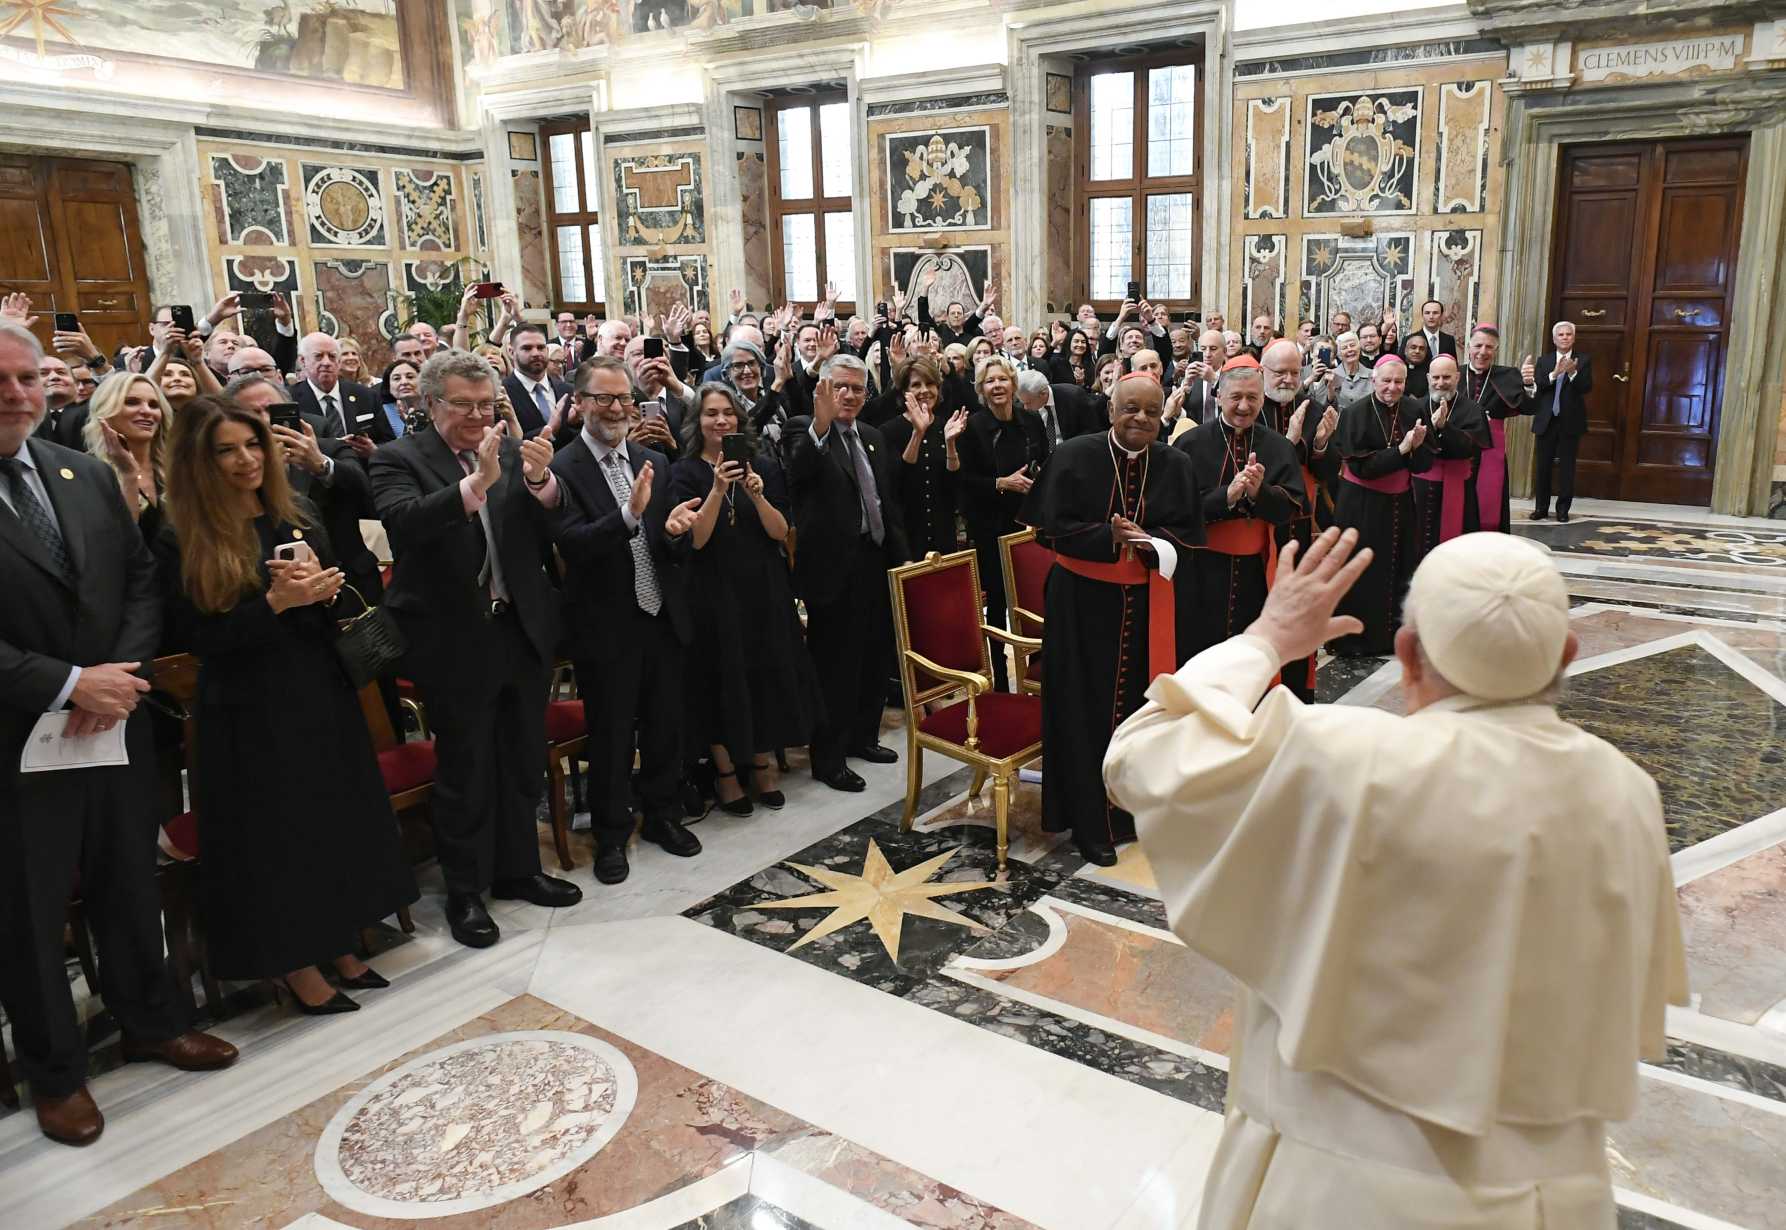 Cultivate solidarity through prayer, adoration, pope tells donors